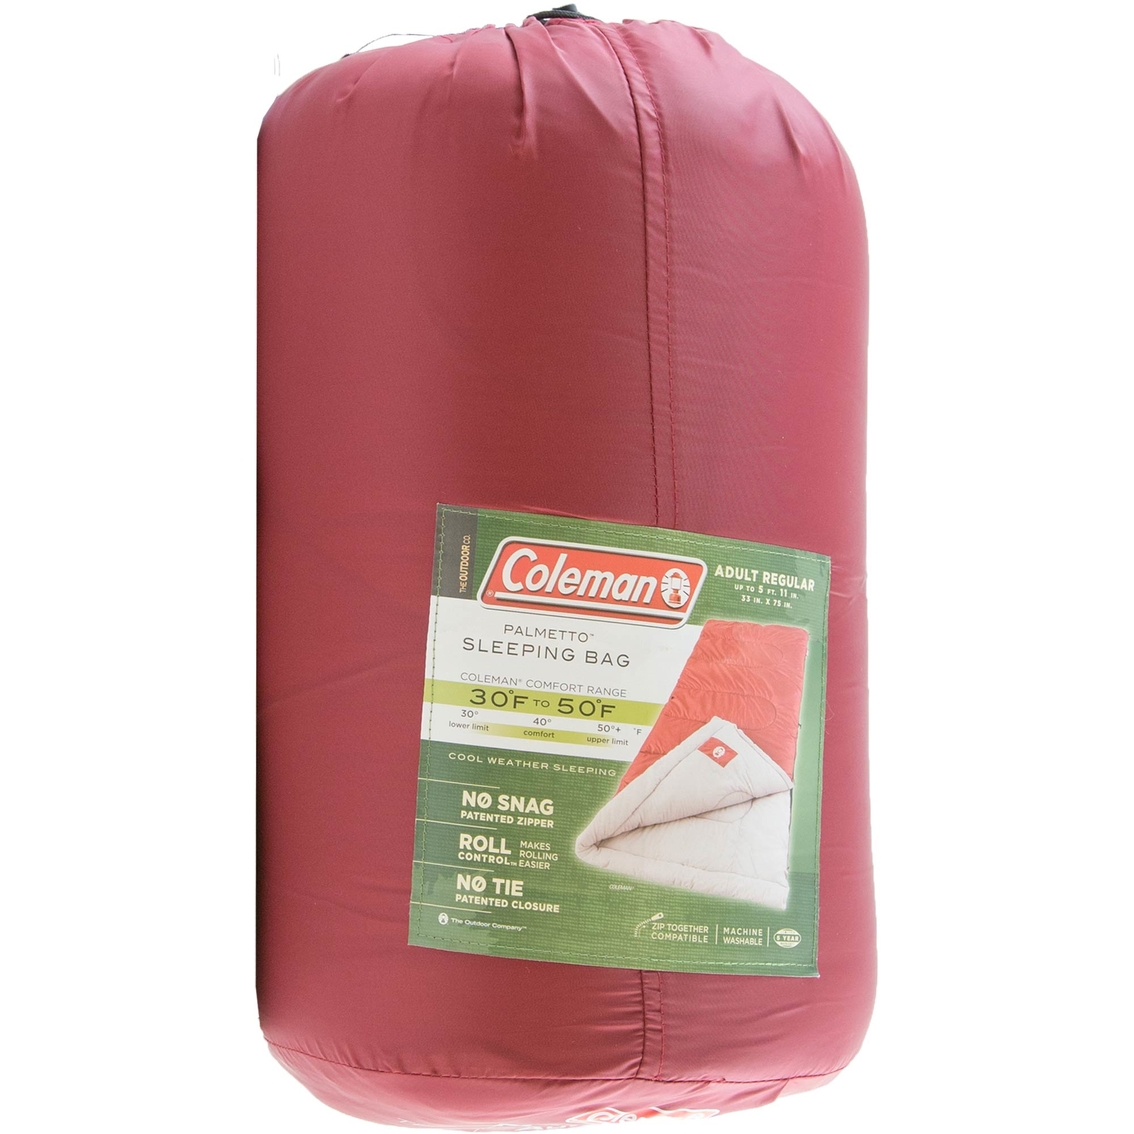 Coleman Palmetto Cool Weather Sleeping Bag - Image 2 of 4